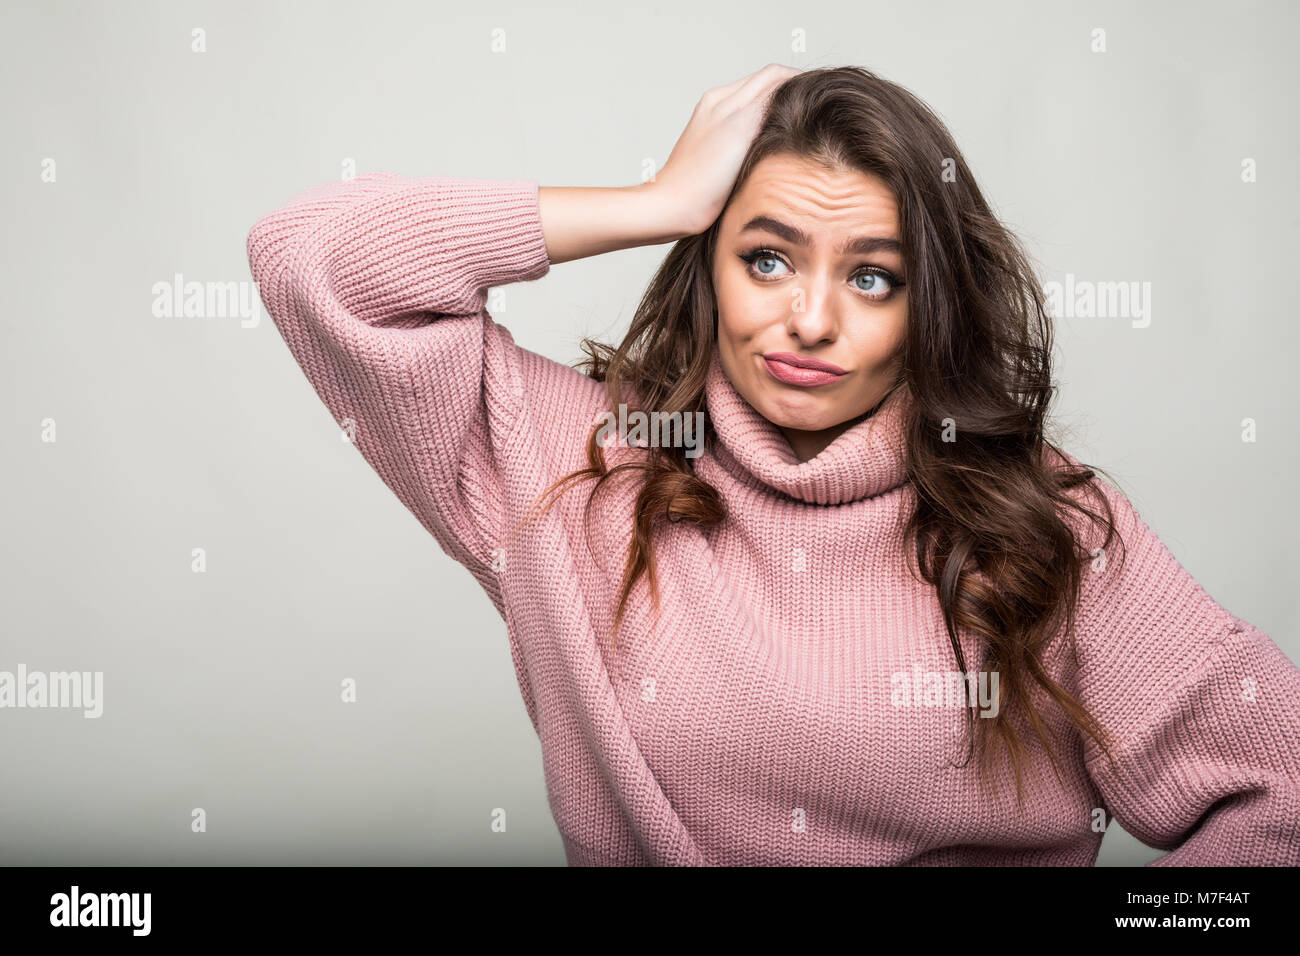 Lovely confused woman isolated against white background Stock Photo